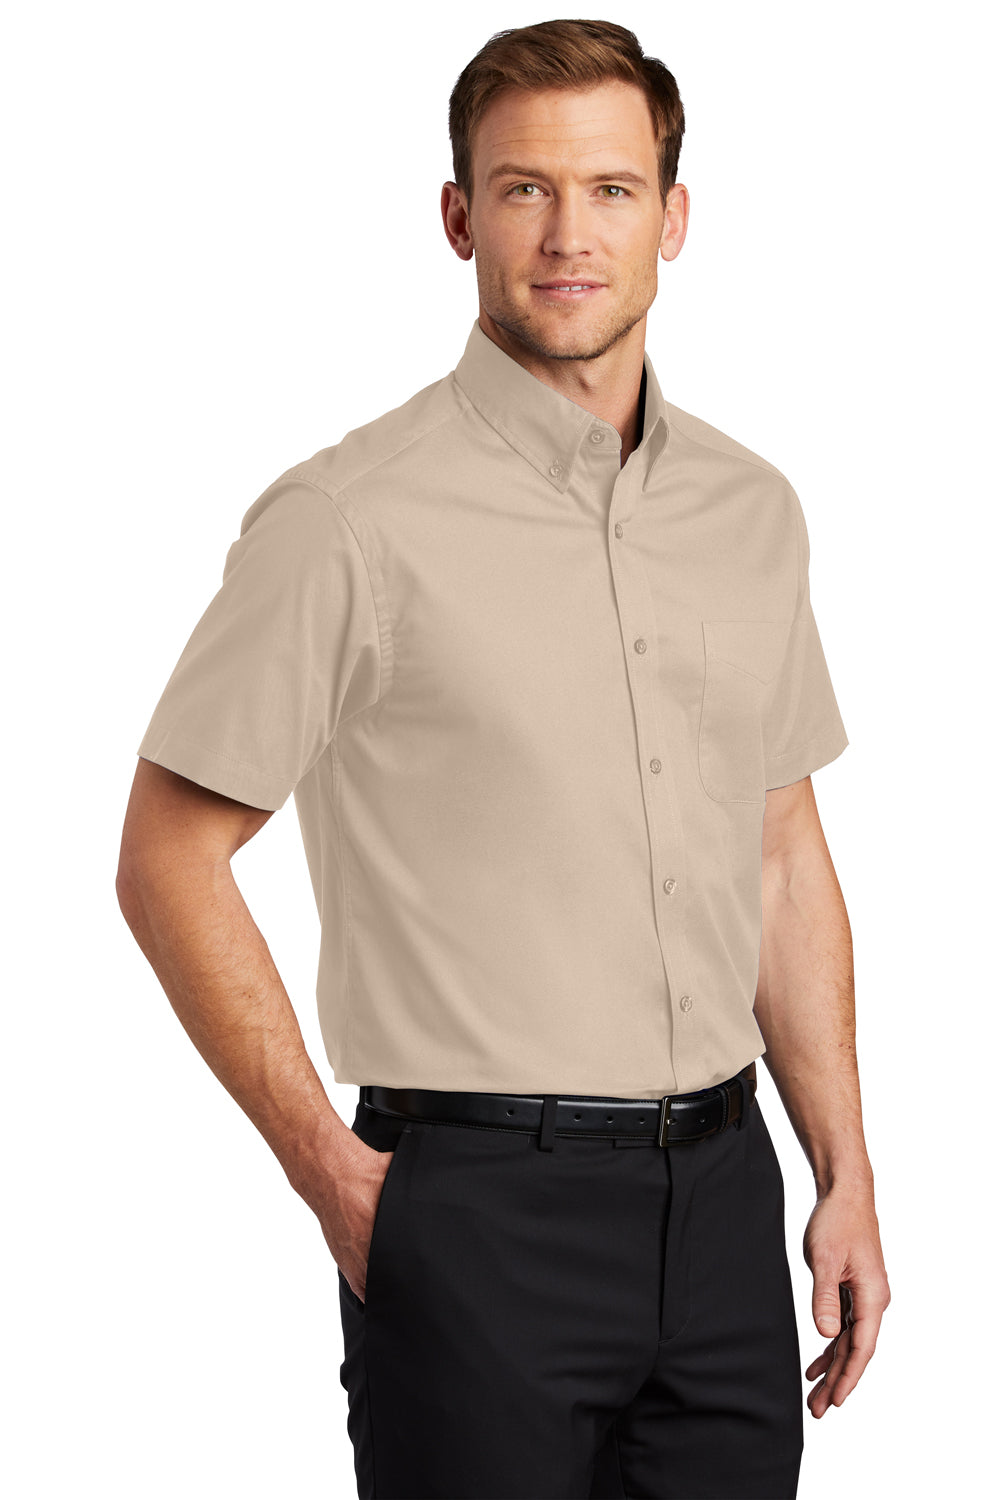 Port Authority S508/TLS508 Mens Easy Care Wrinkle Resistant Short Sleeve Button Down Shirt w/ Pocket Stone 3Q